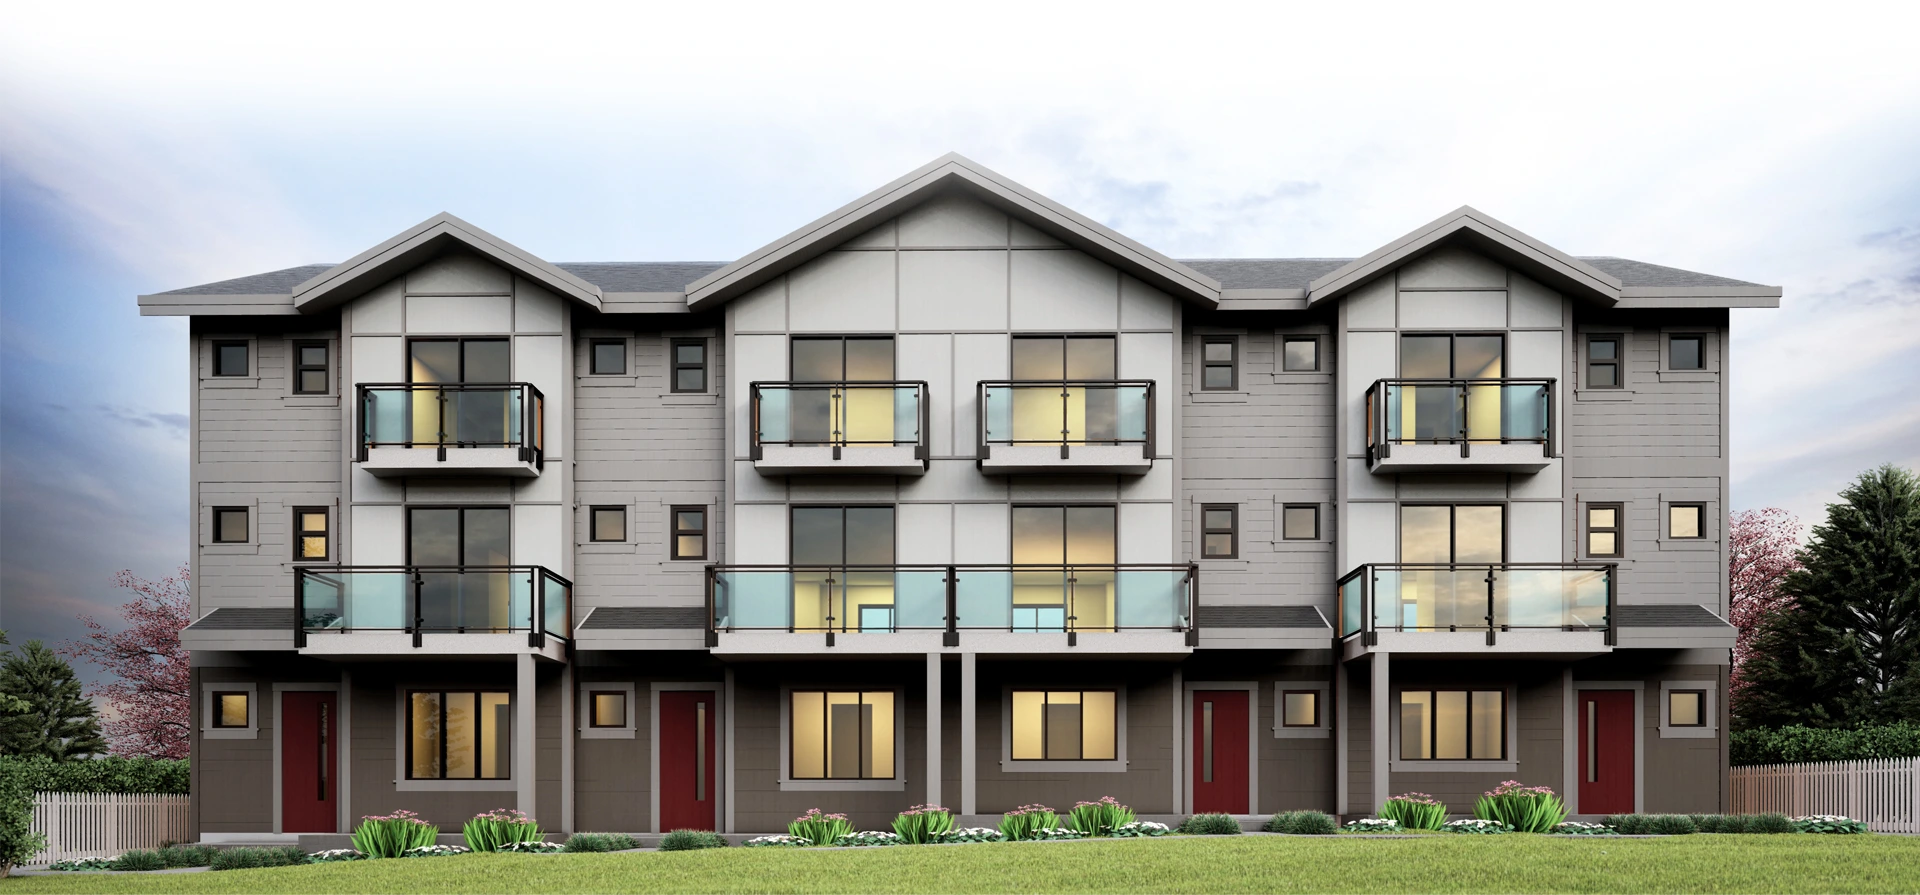 Mason Living by Panorama West Group is a 30-unit Surrey townhome development.